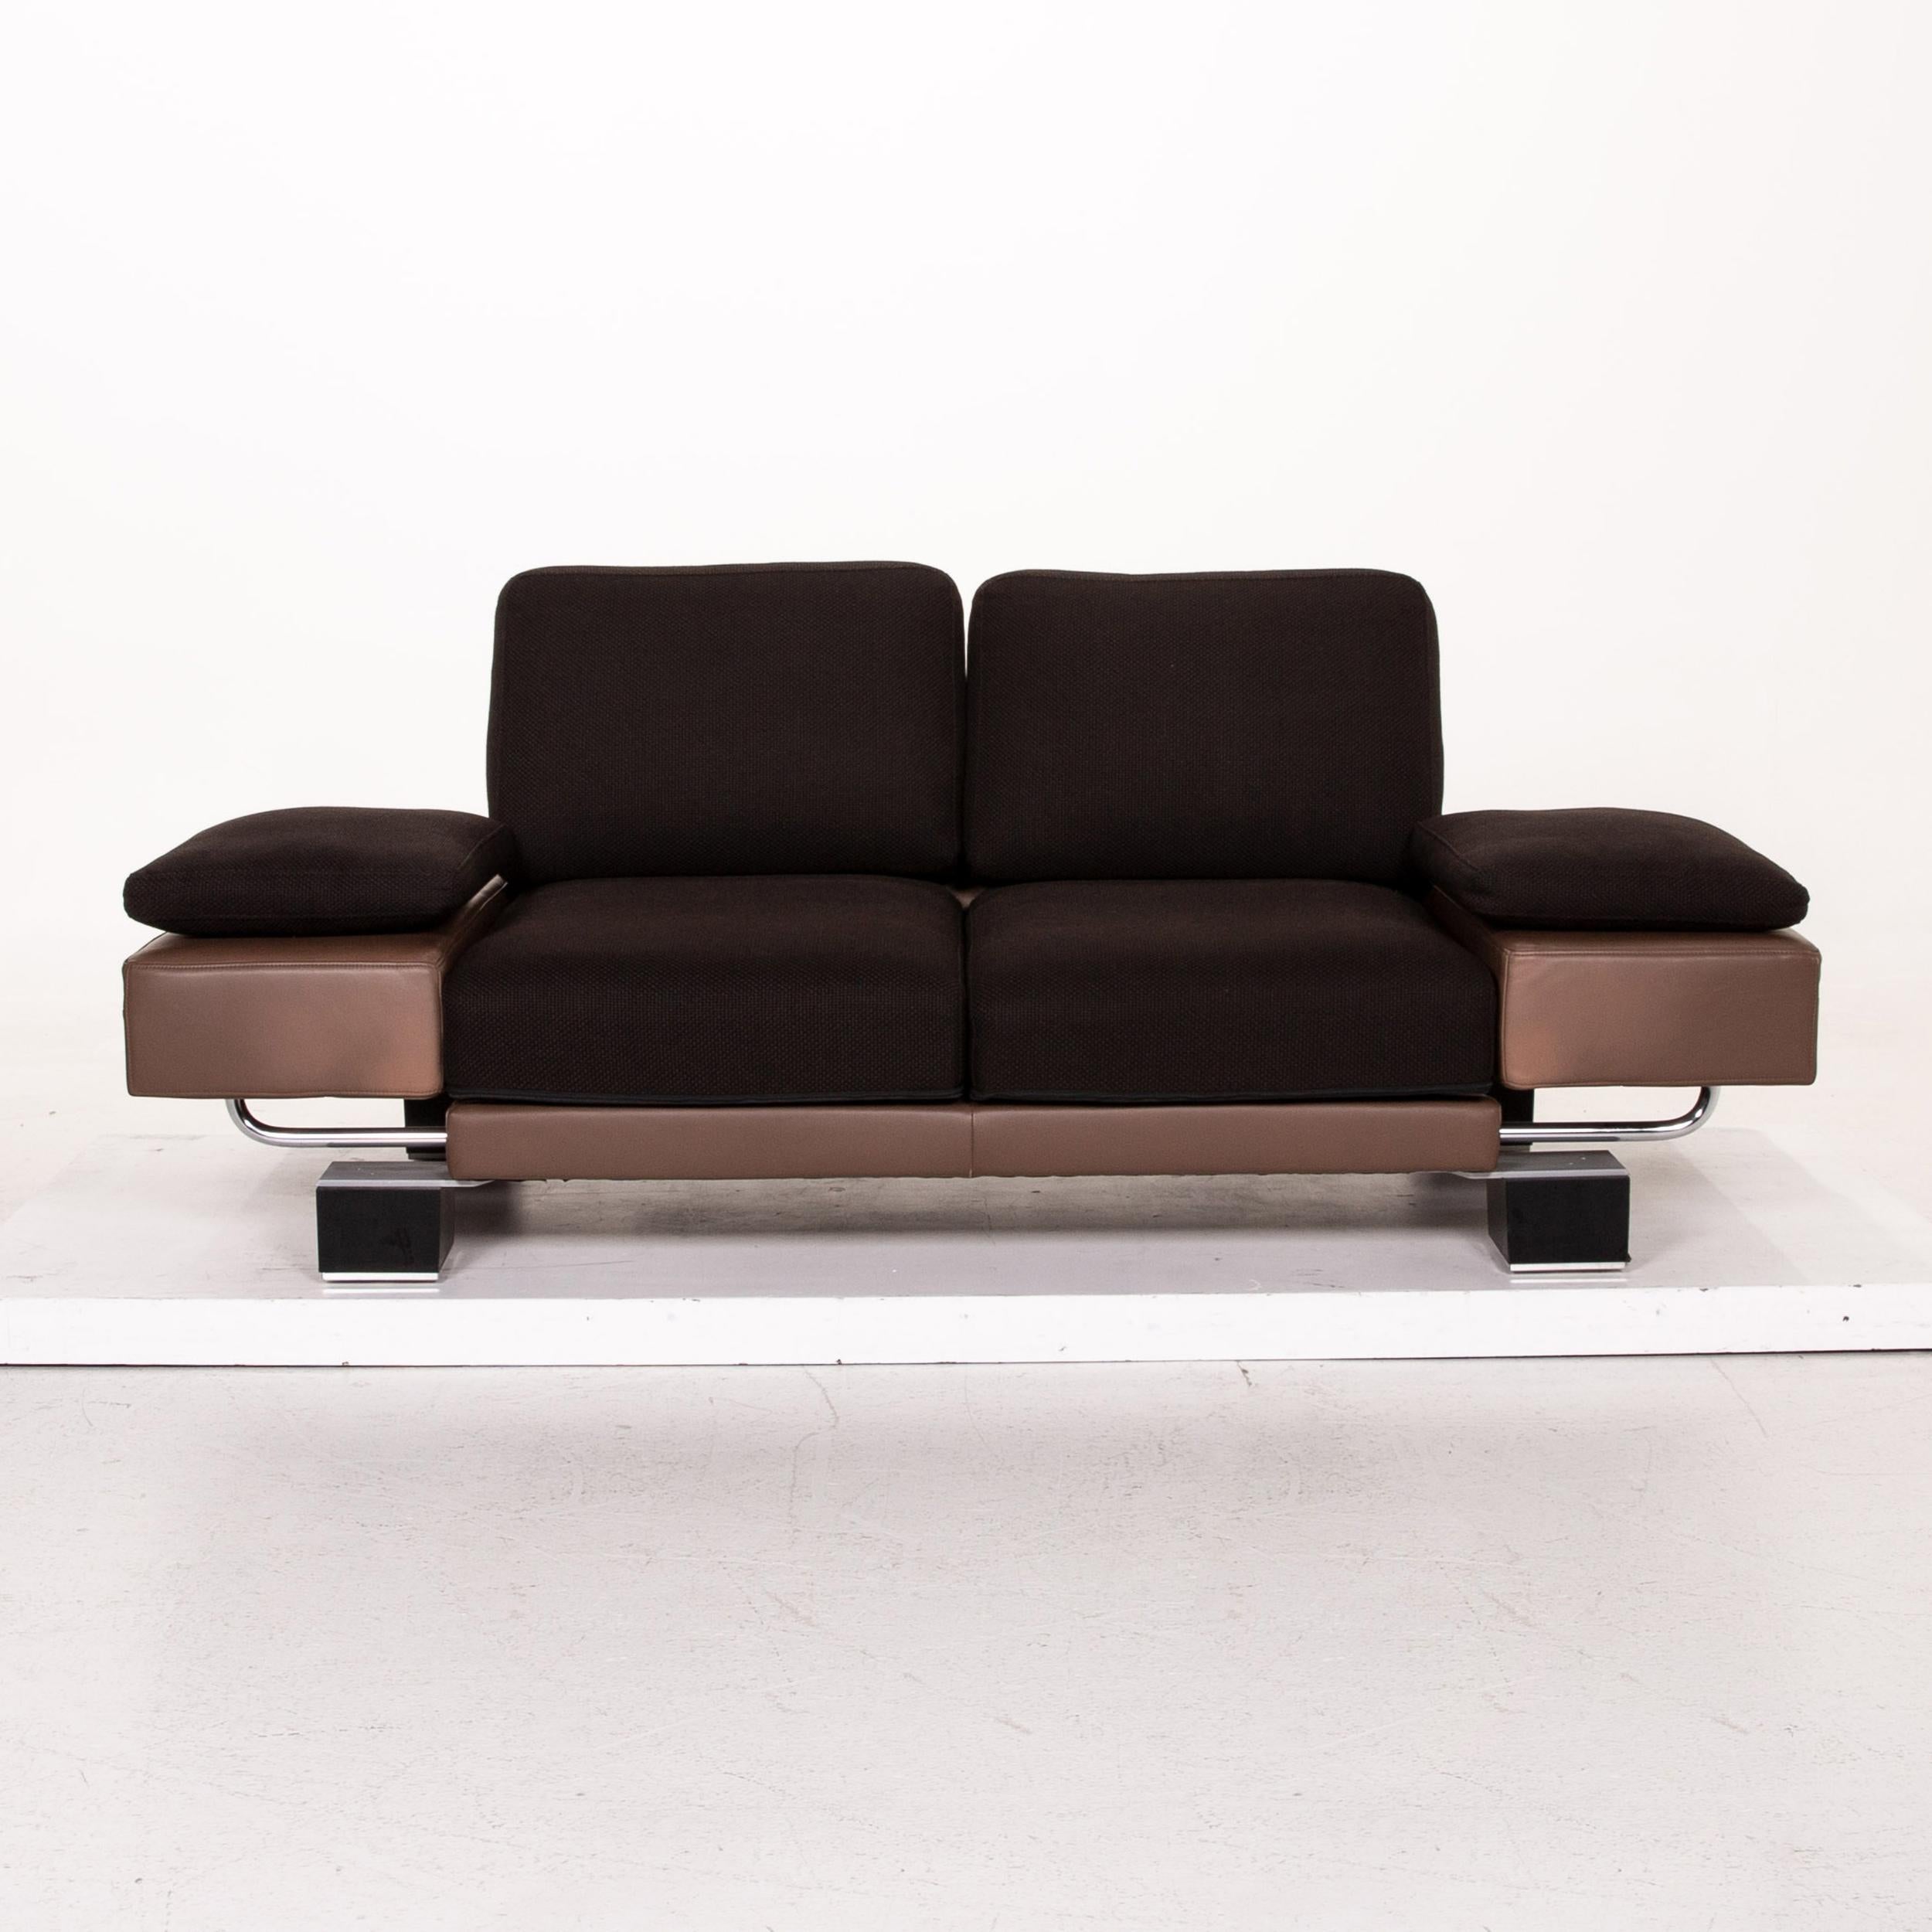 Modern Rolf Benz Ego Leather Fabric Sofa Brown Dark Brown Two-Seat Function Couch